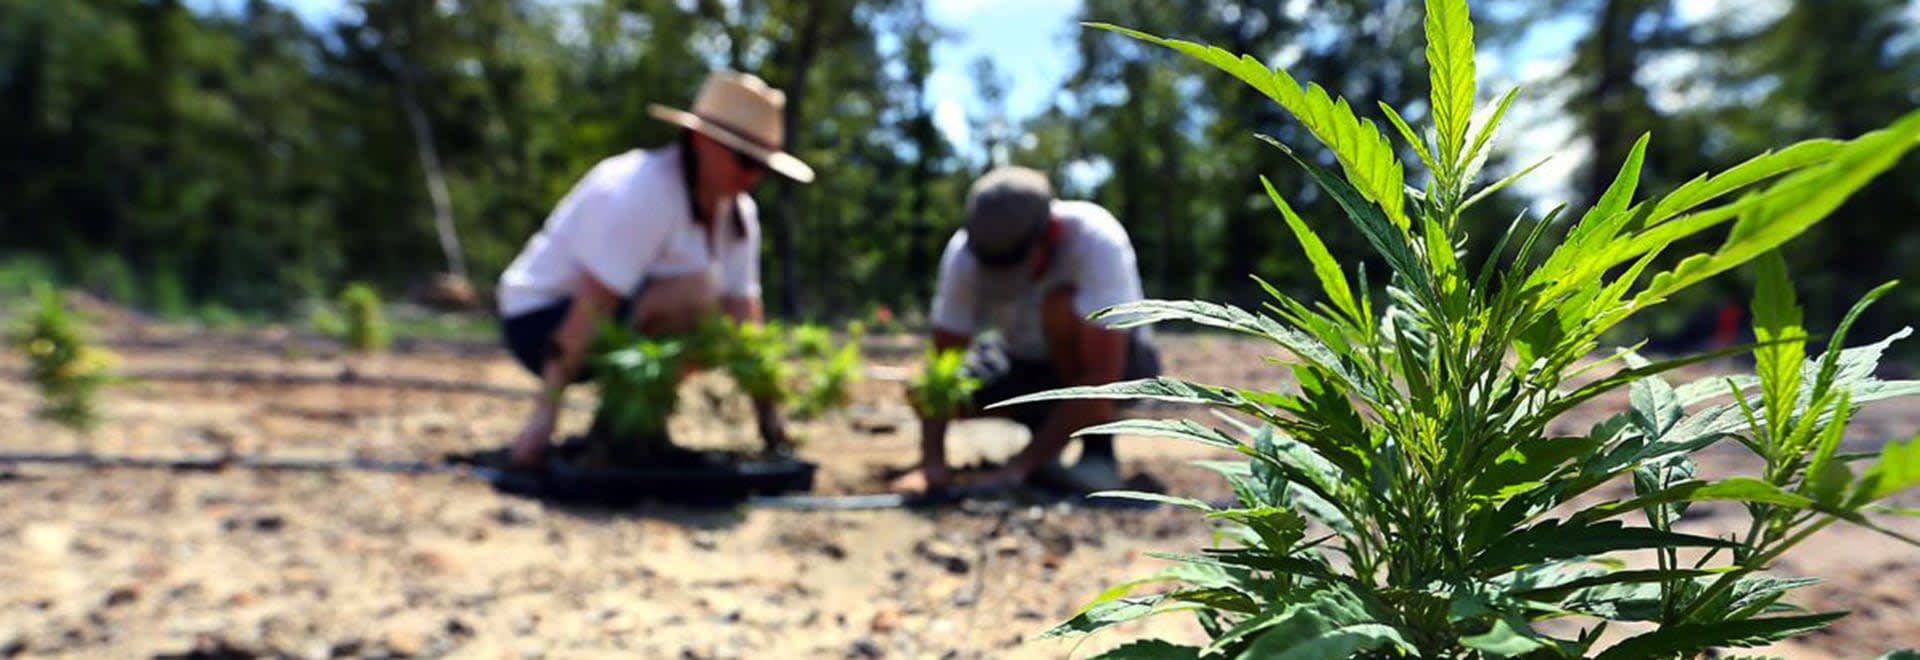 Picture of 2 people planting hemp